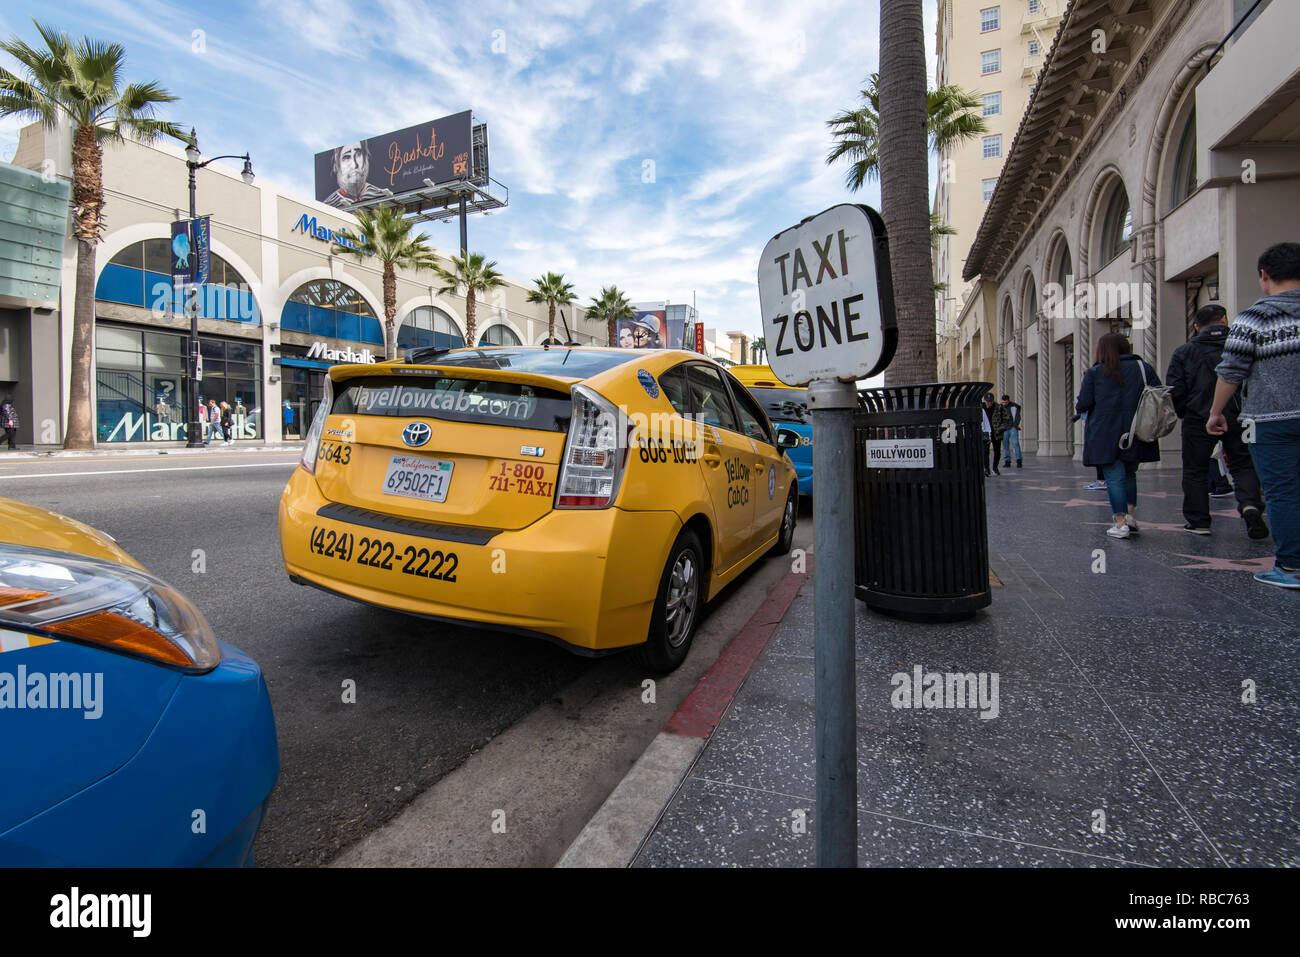 People walking down Hollywood Boulevard past a yellow Toyota Prius taxi cab in a taxi zone in Los Angeles, California, USA Stock Photo